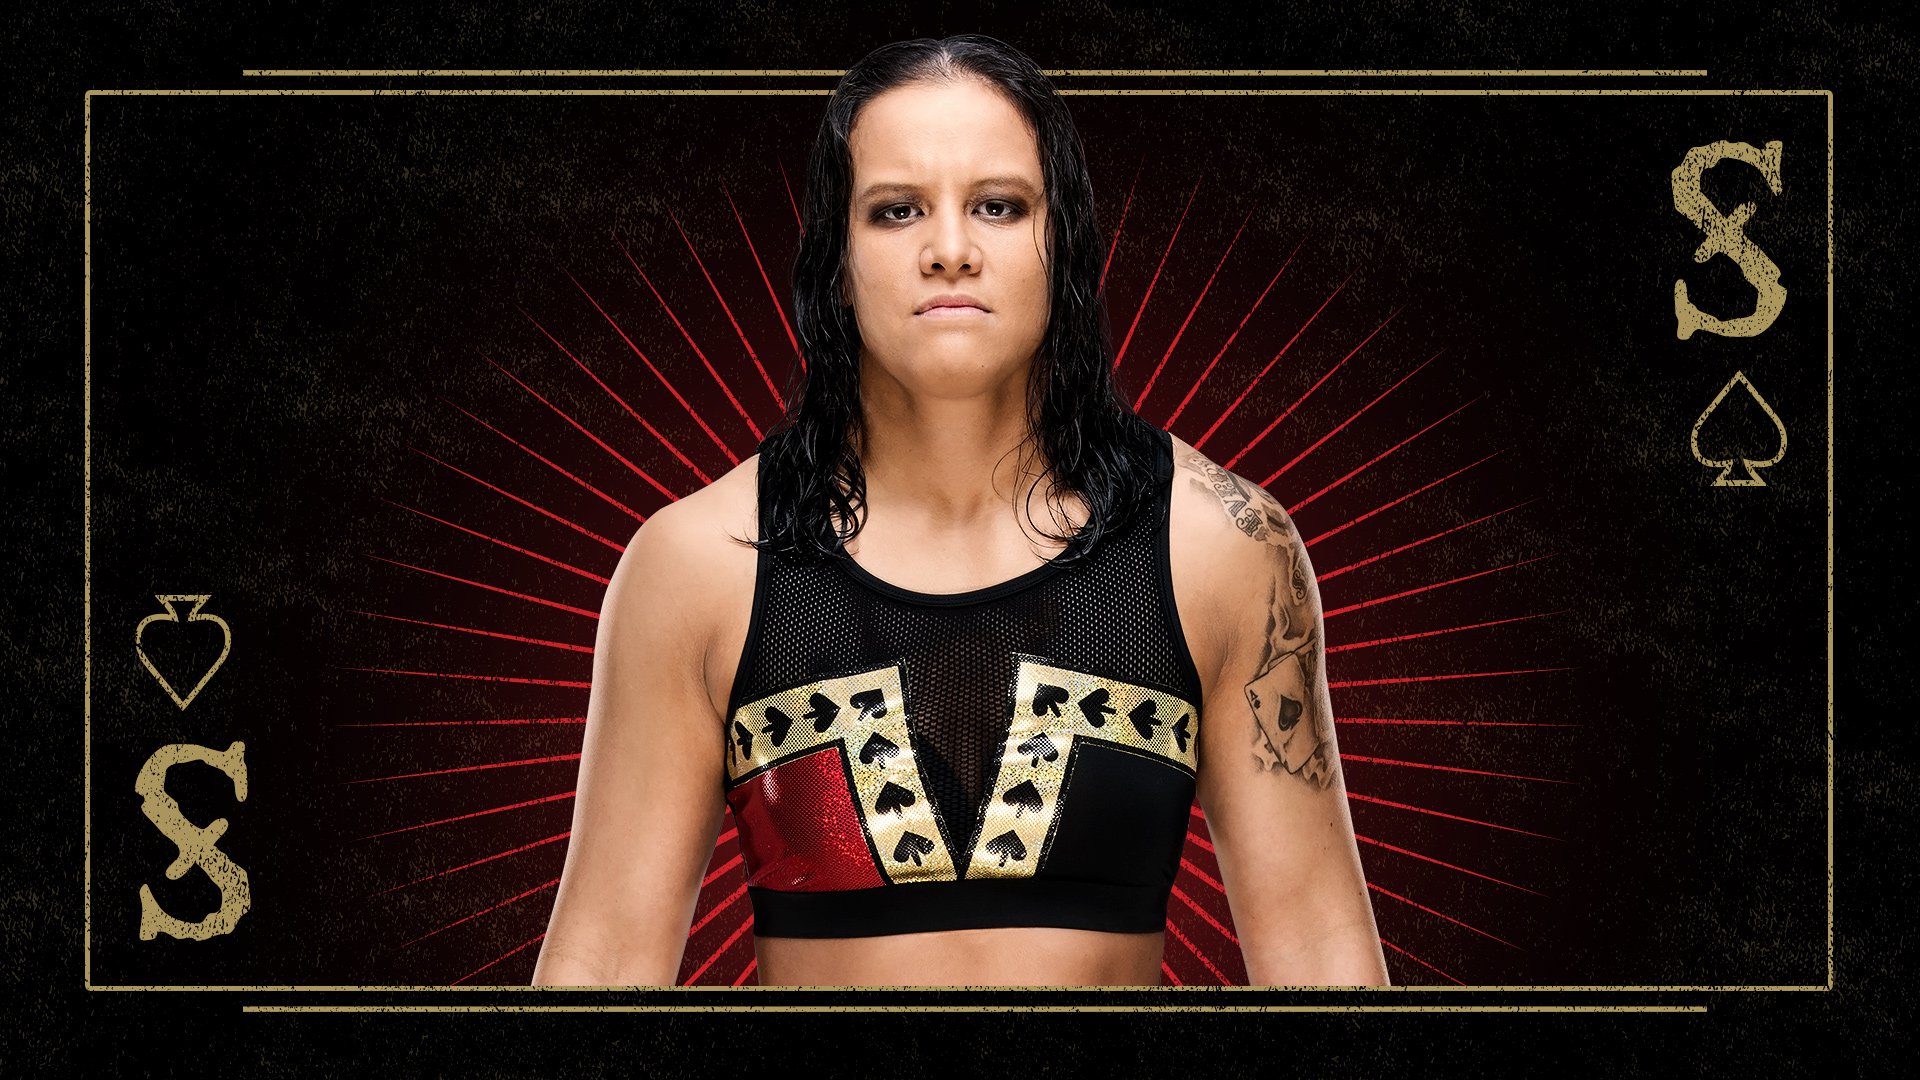 Shayna Baszler Q&A: “I’m doing this my way”